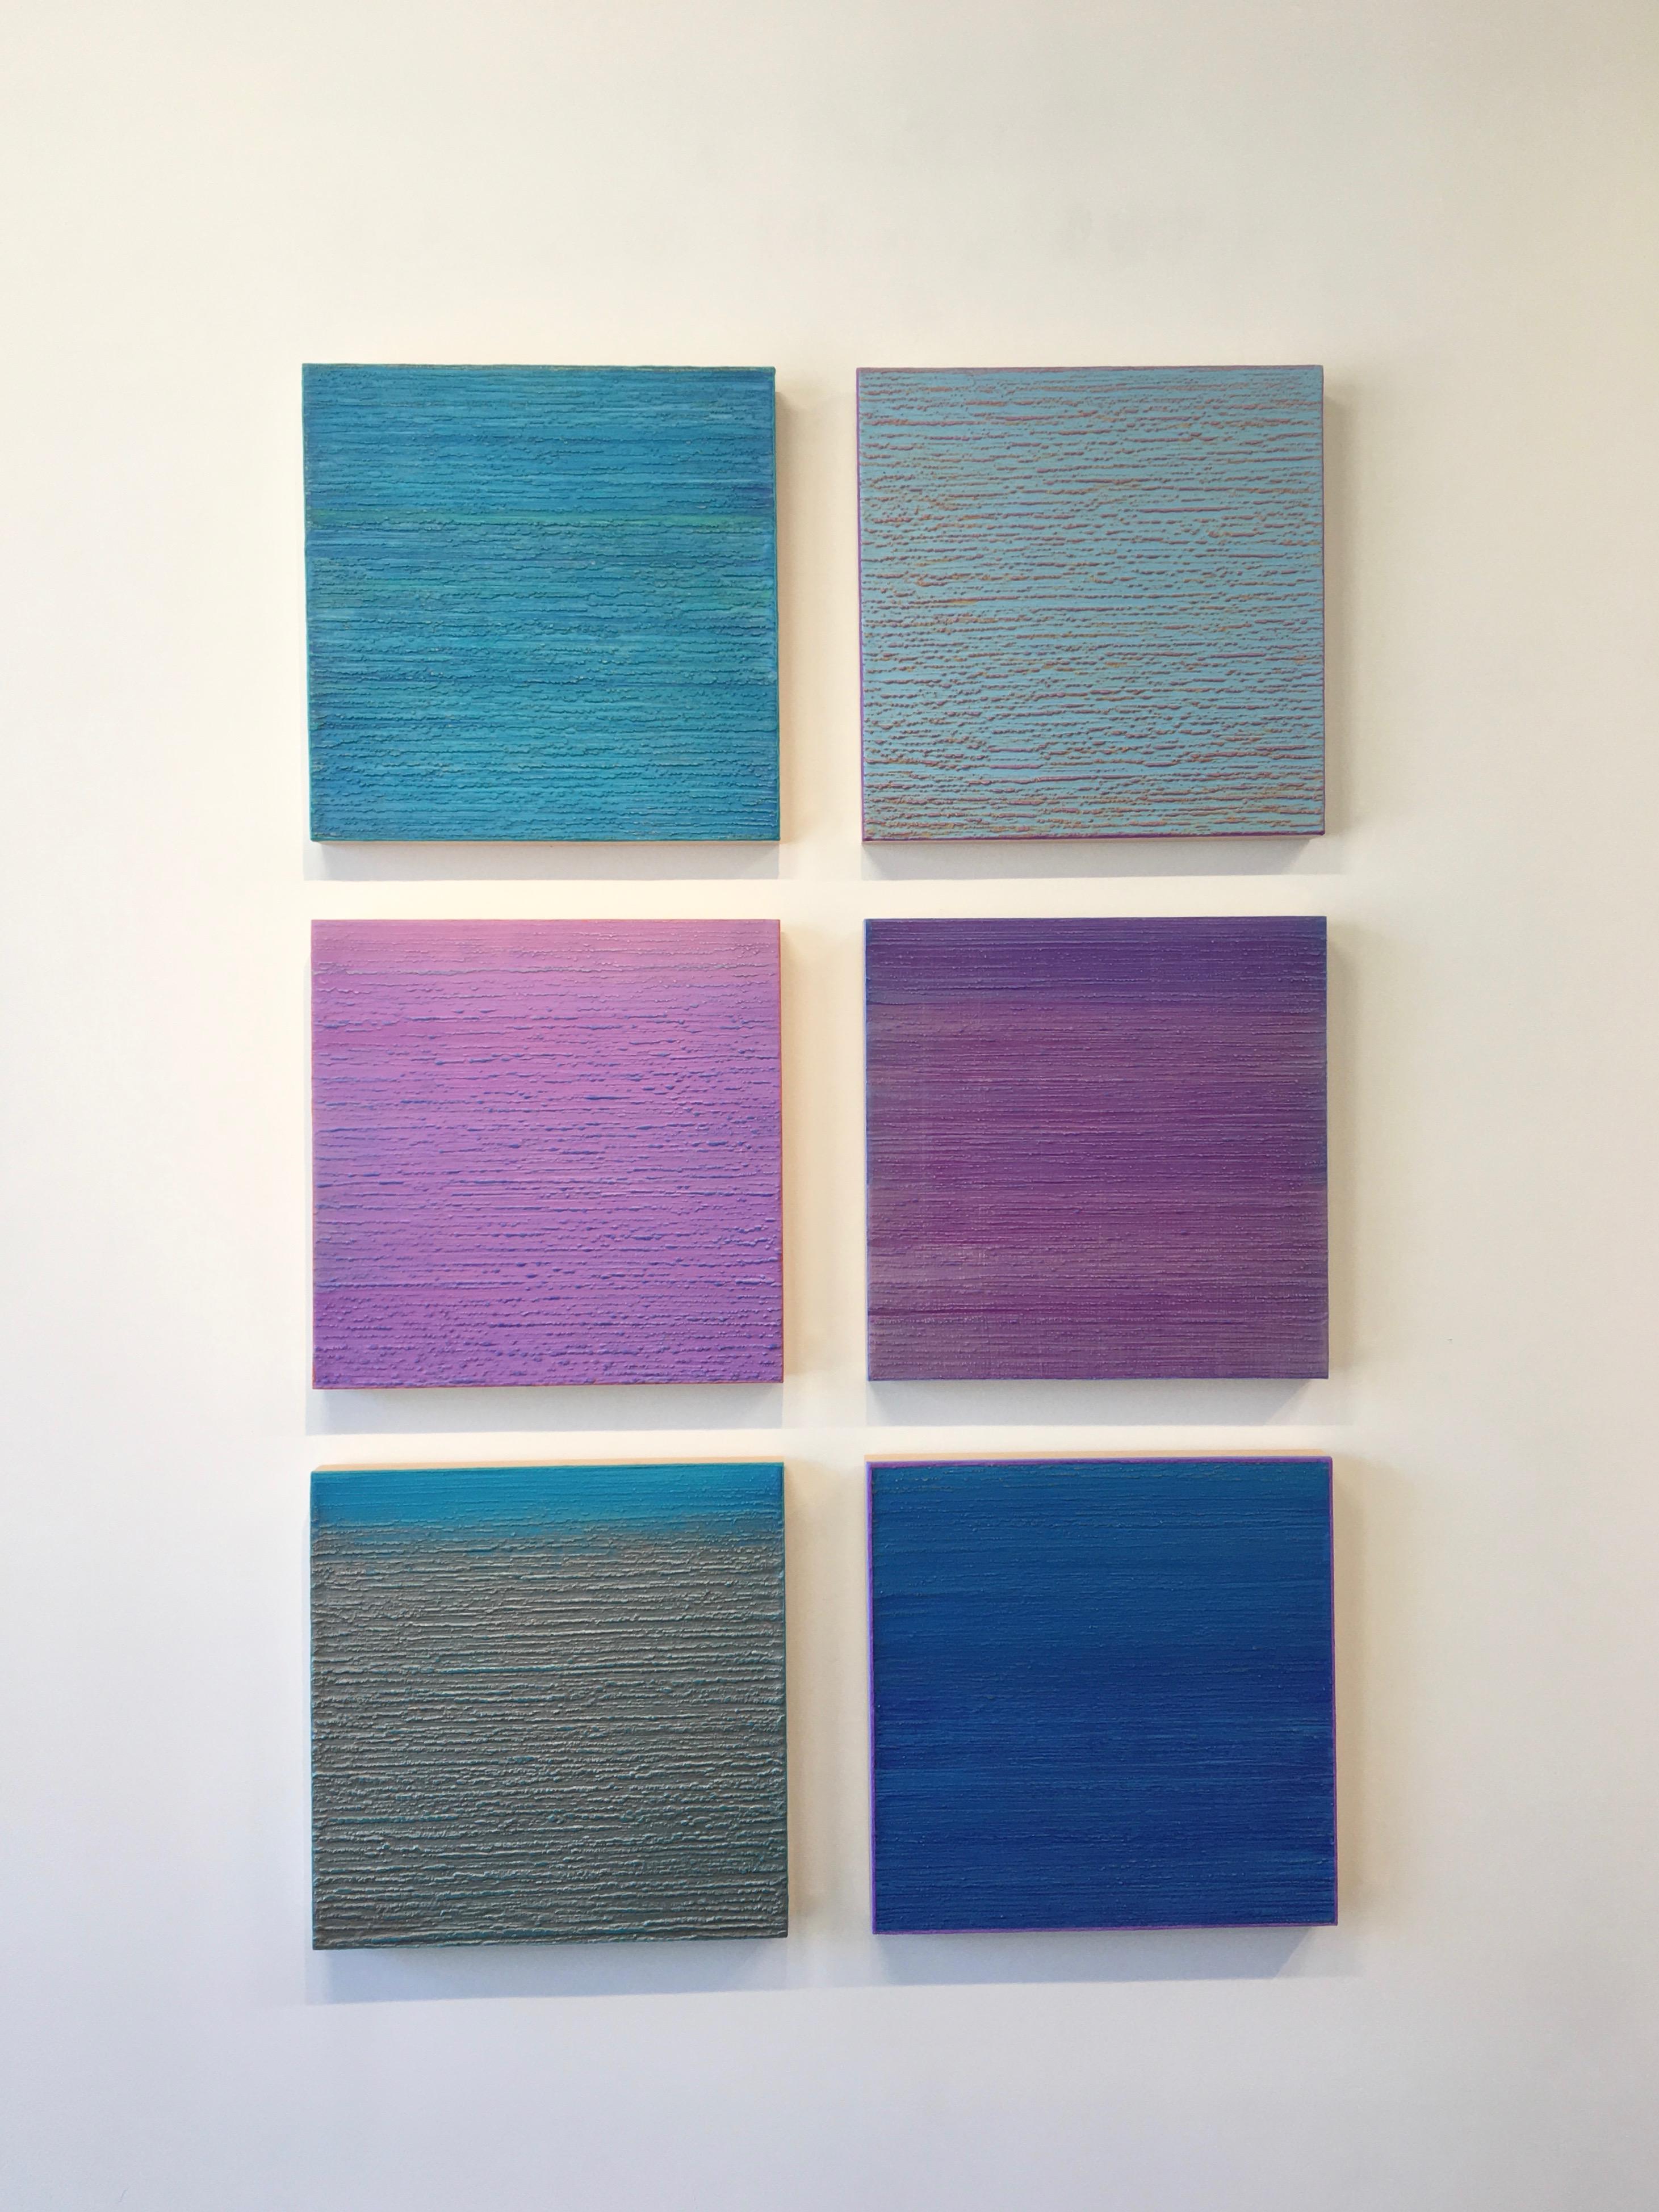 A bright, vibrant teal blue encaustic (pigmented beeswax) painting on birch panel accented with bright blue edges. Signed and titled on the verso.

Joanne Mattera’s paintings can be described as lush minimalism, the work is chromatically rich and